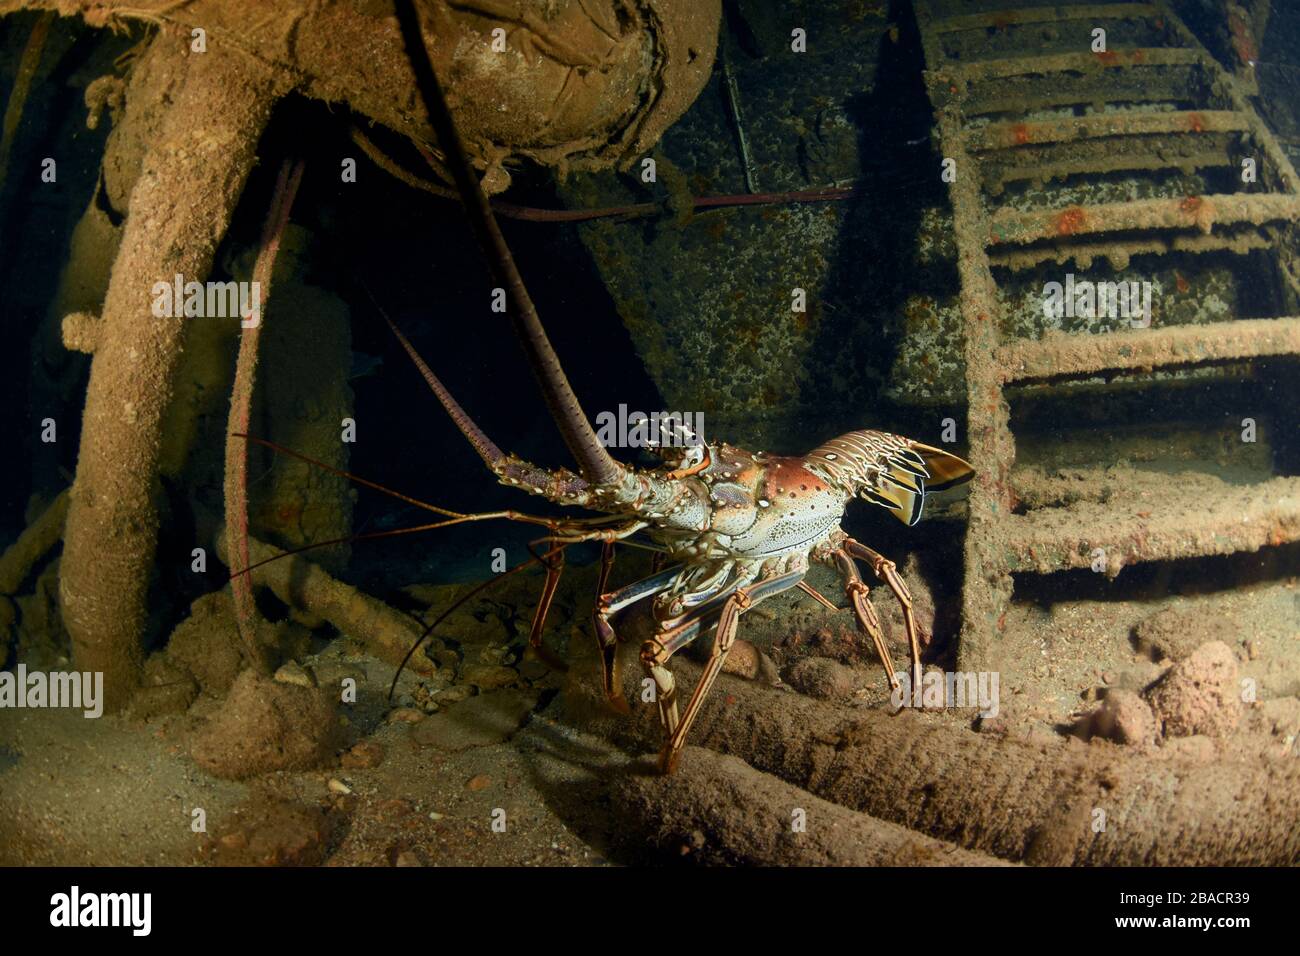 Caribbean spiny lobster walking about inside the ship wreck of Carib Cargo in St. Maarten Stock Photo